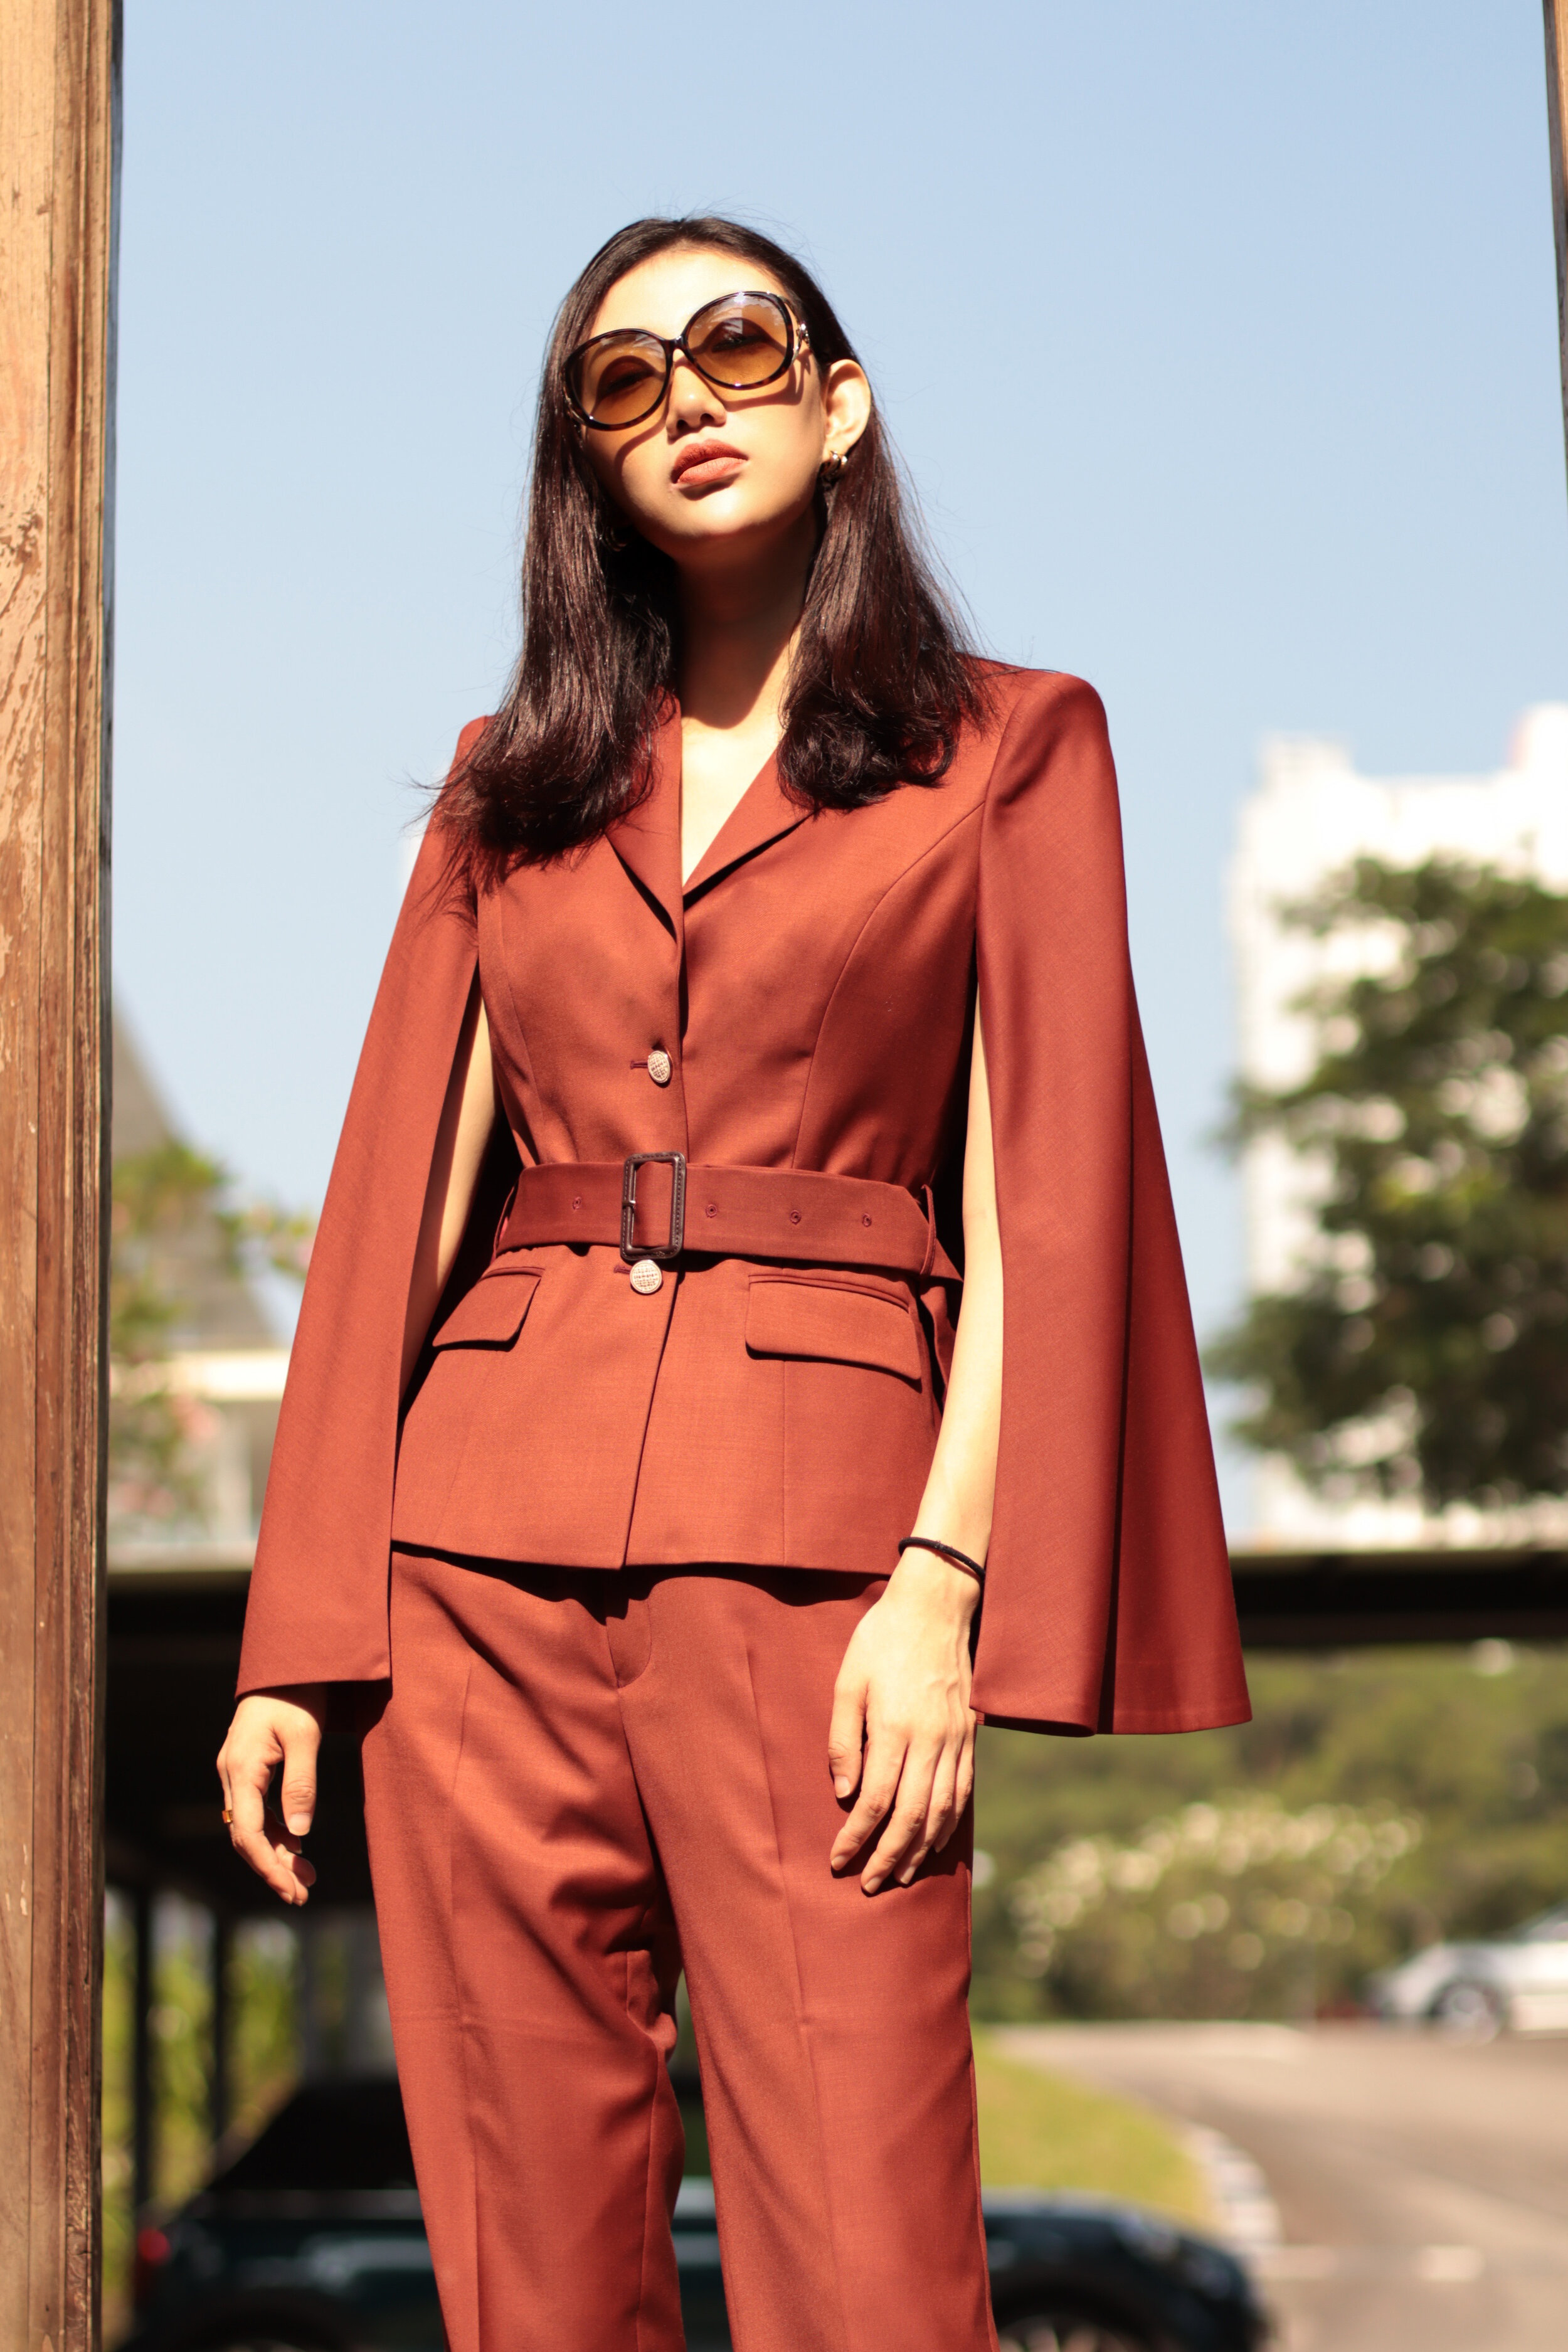 10 Women's Blazer Suits To Look Bold And Beautiful On Any Occasion